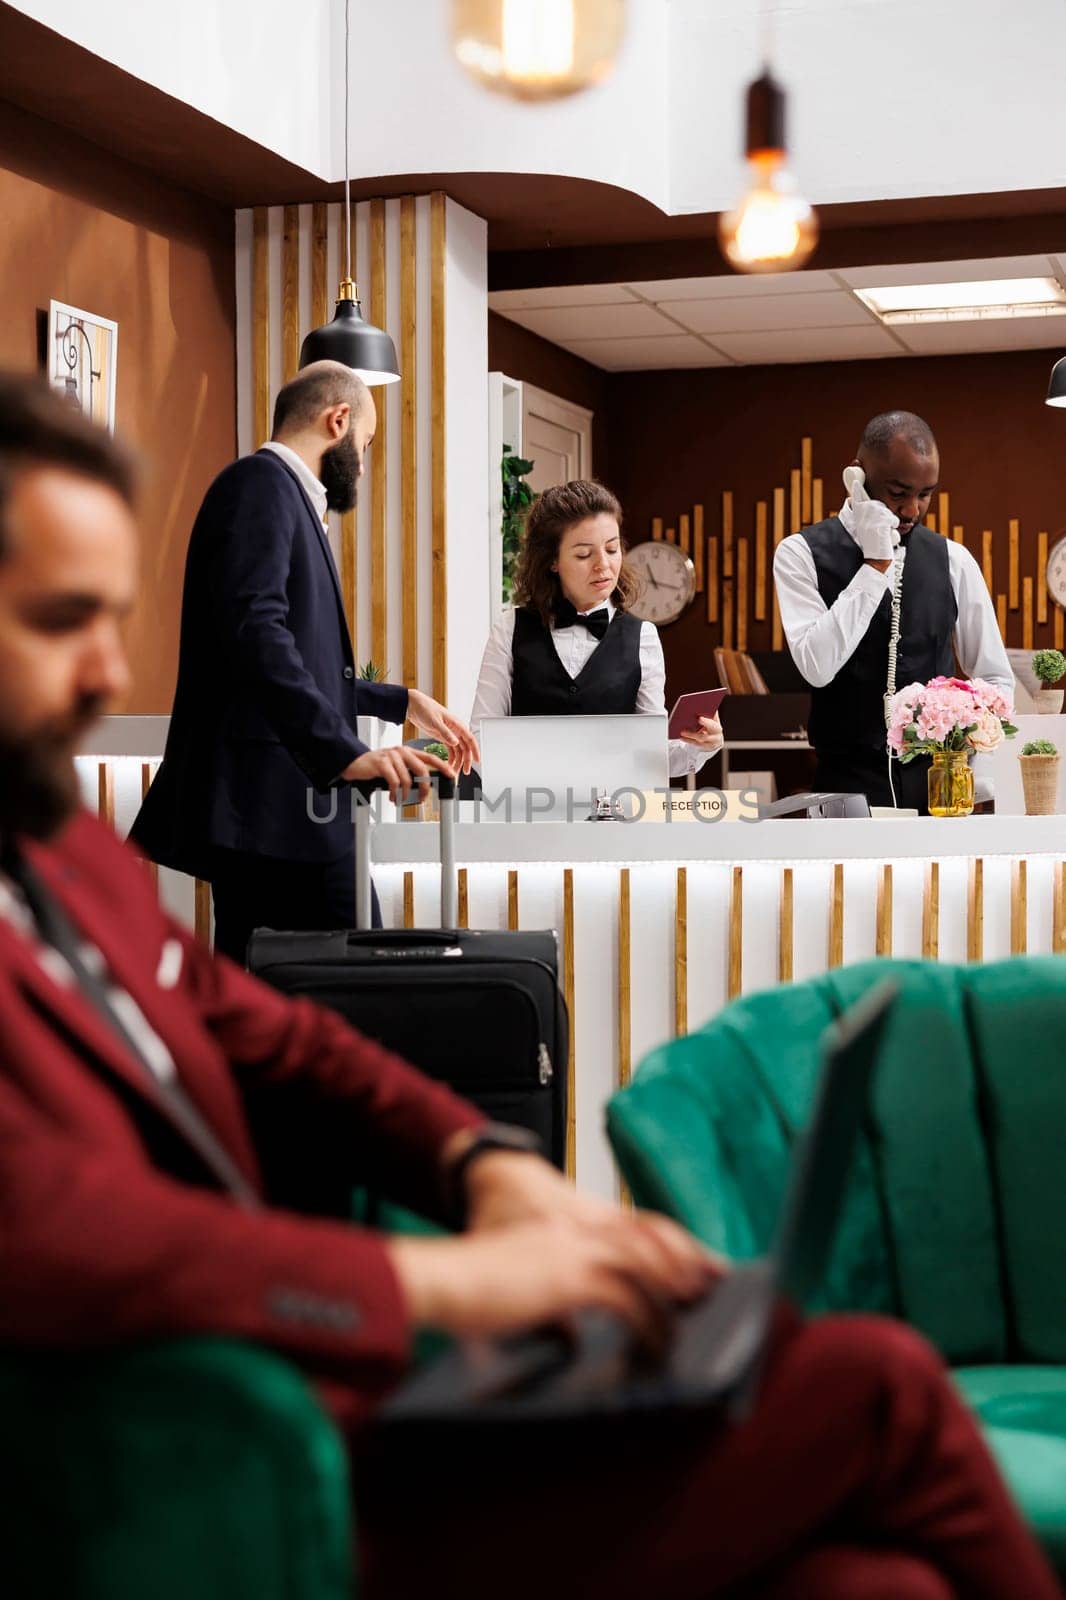 Traveling for work, businessman checking in at hotel reception desk with passport for room reservation confirmation. Guest giving id documents to front desk staff, identification services.